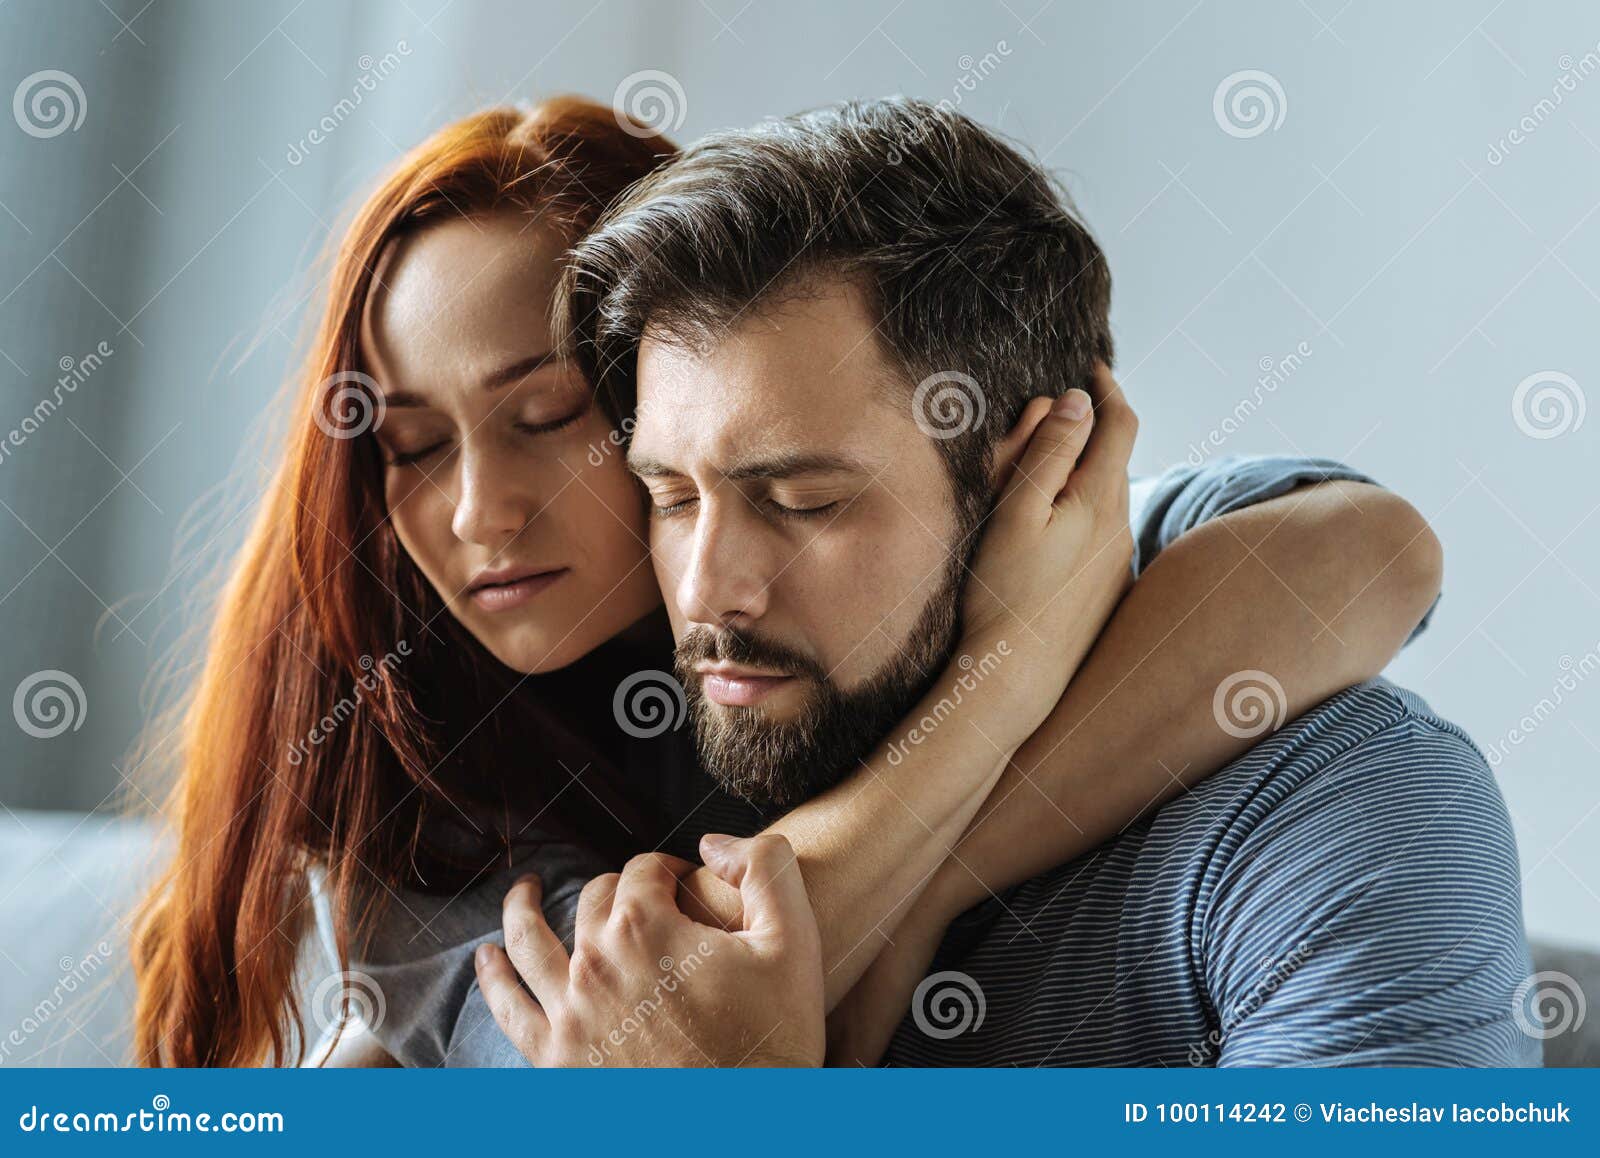 Pleasant Loving Couple Caring about Each Other Stock Photo - Image ...